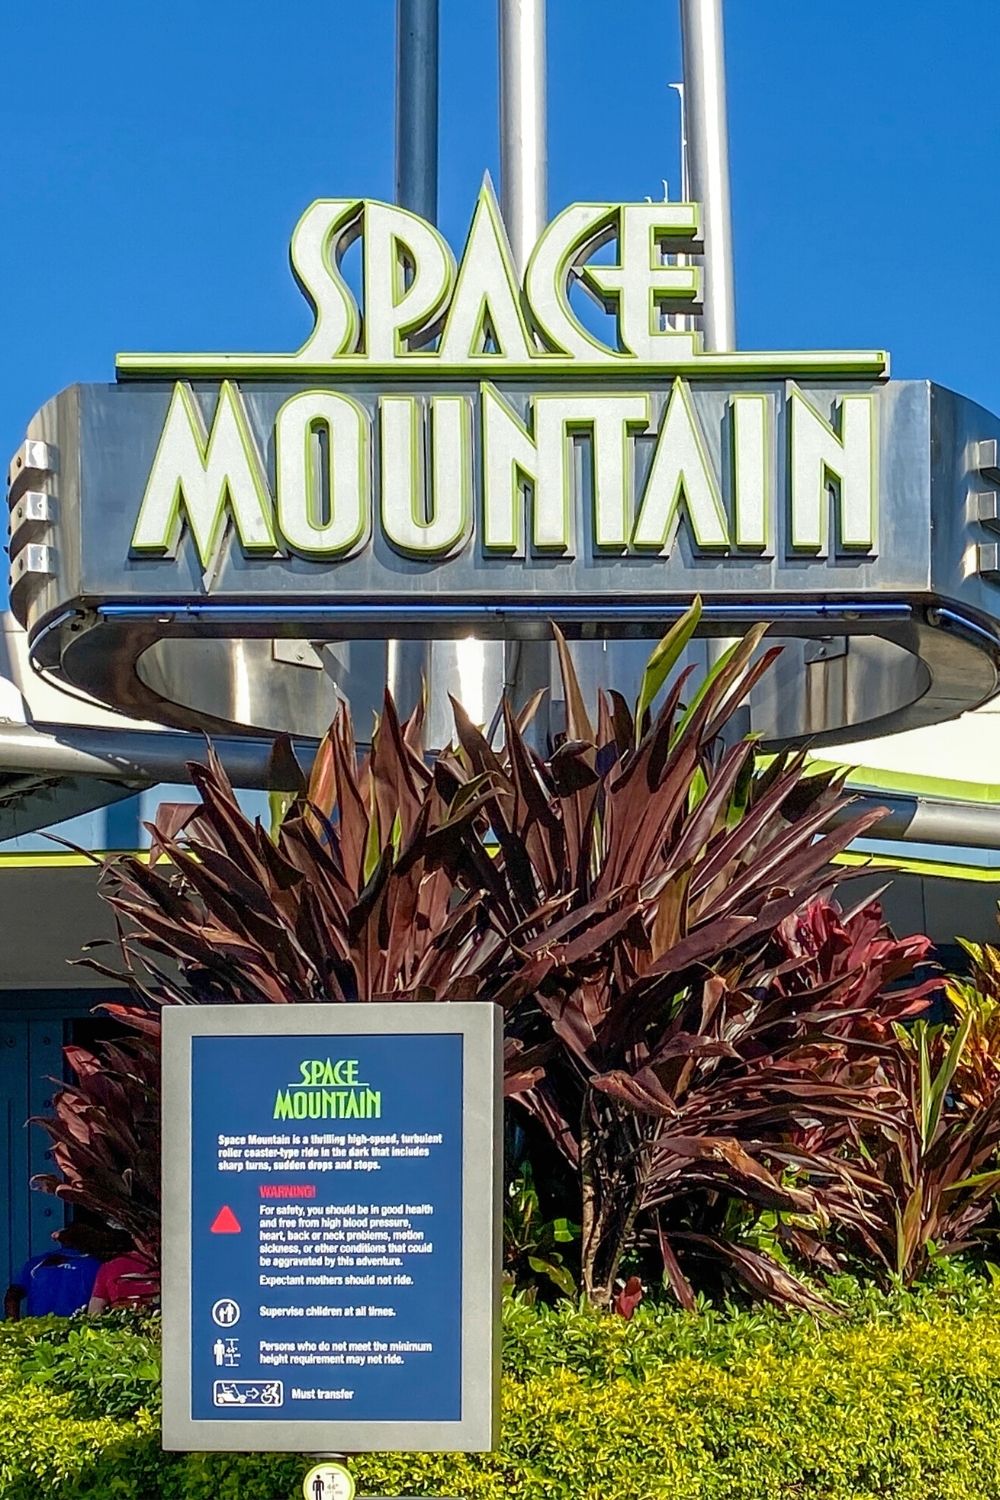 a sign posted outside of Space Mountain at Disney World gives a warning about who should not ride the attraction, what the height requirements are, etc.